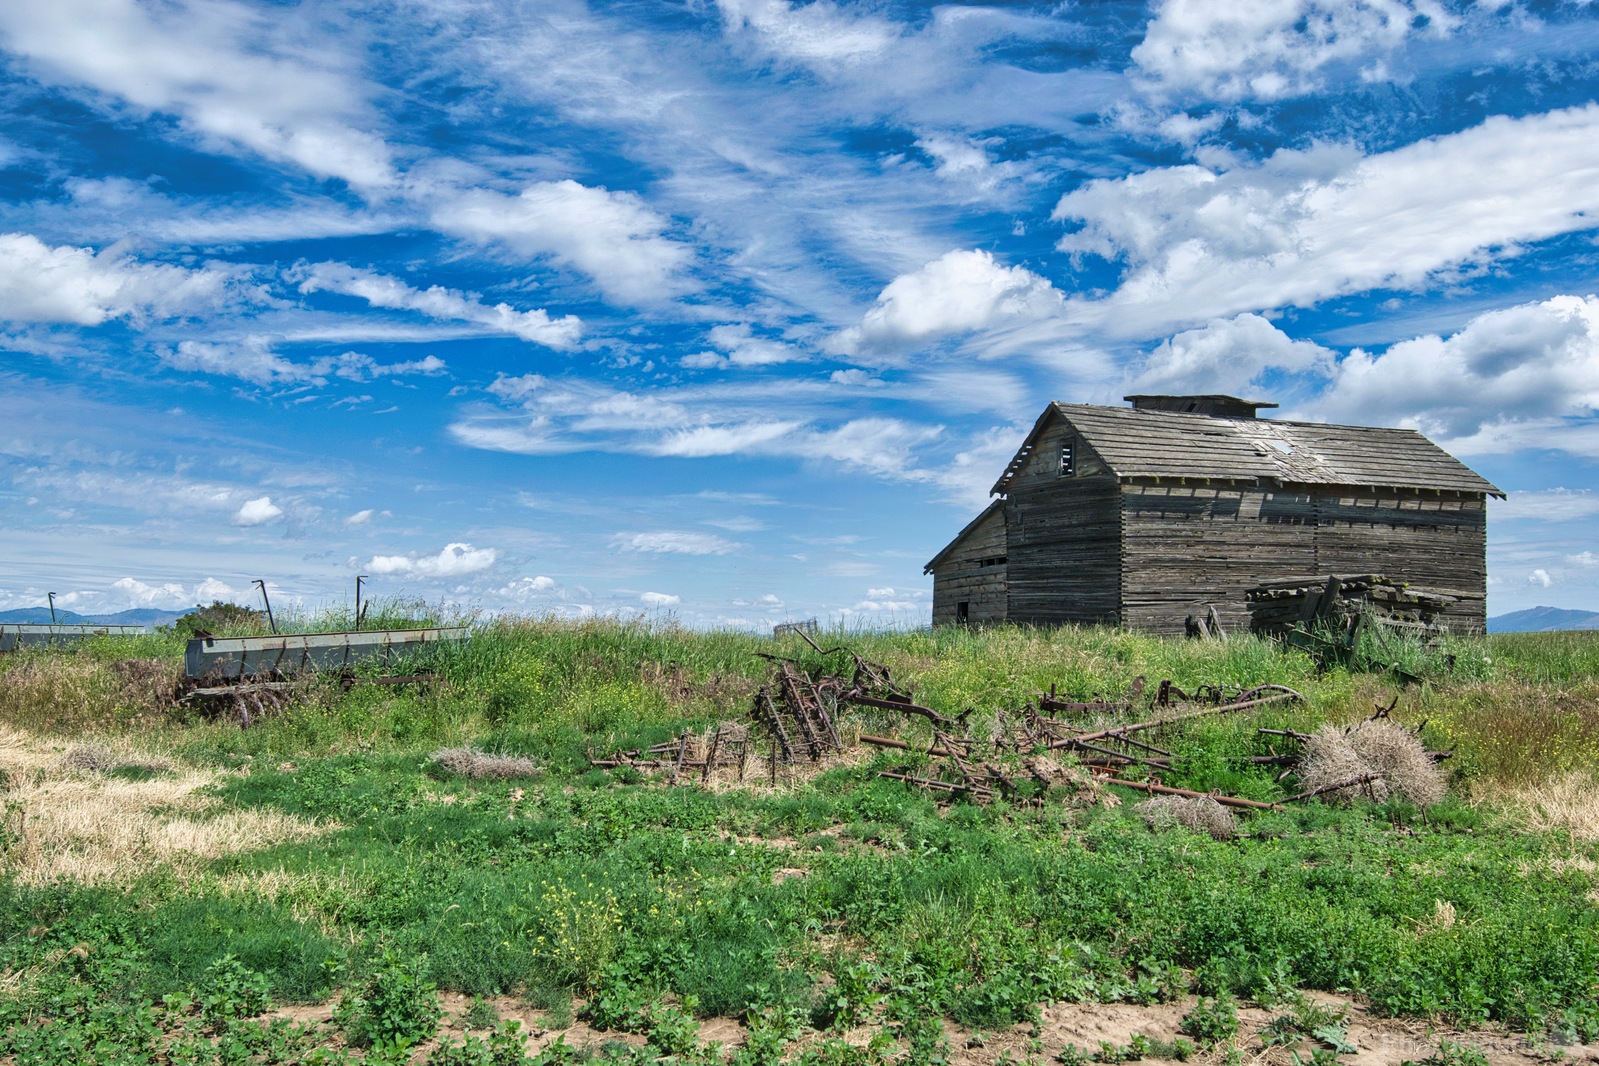 Image of The Old Barn On The Hill by Steve West